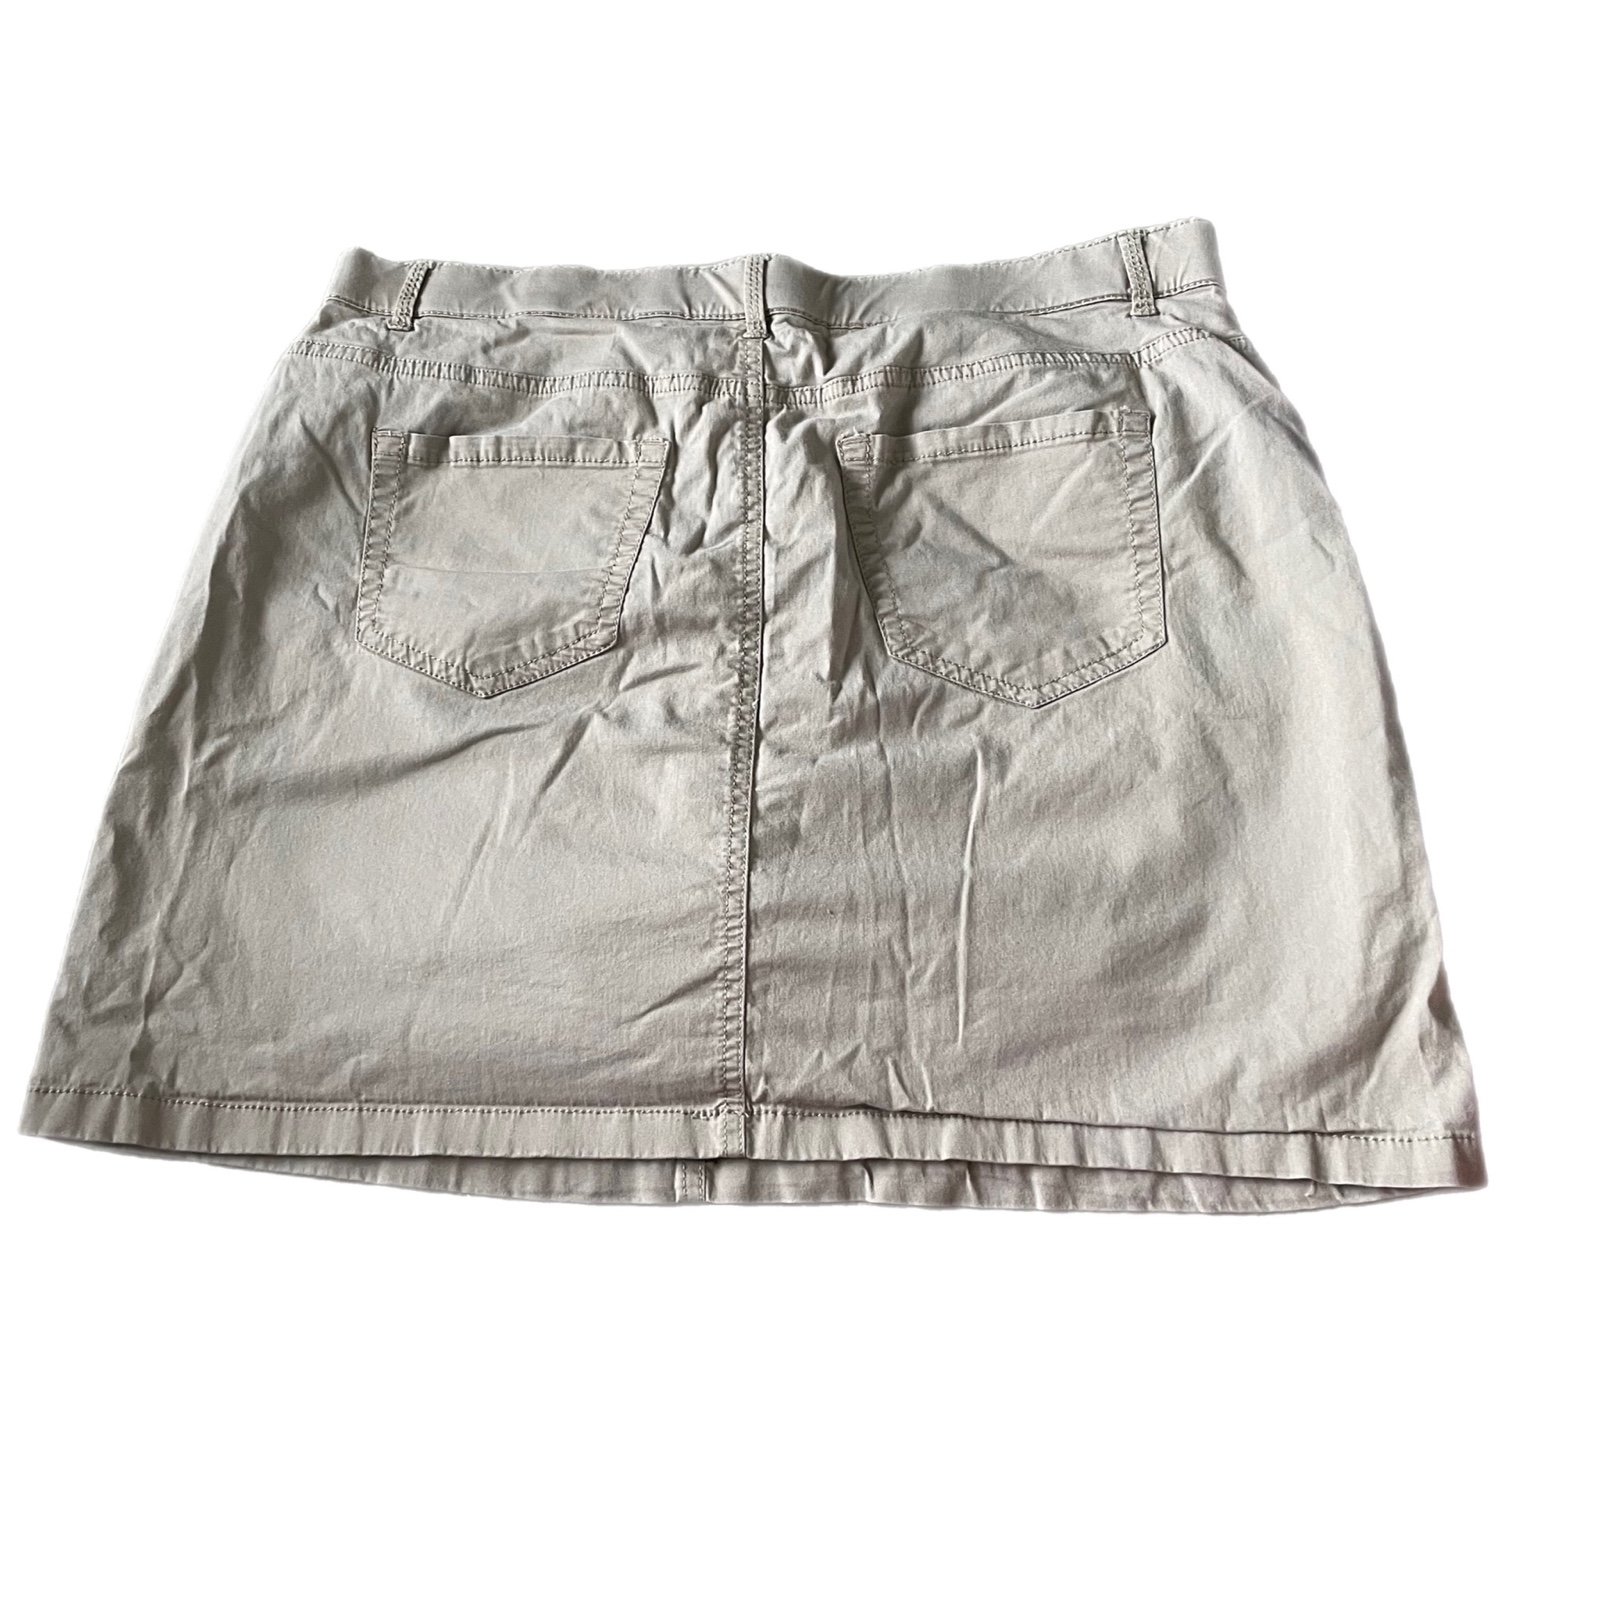 Discounted Croft & Barrow khaki classic fit skort size 12 oXQNwMJZ1 Outlet Store